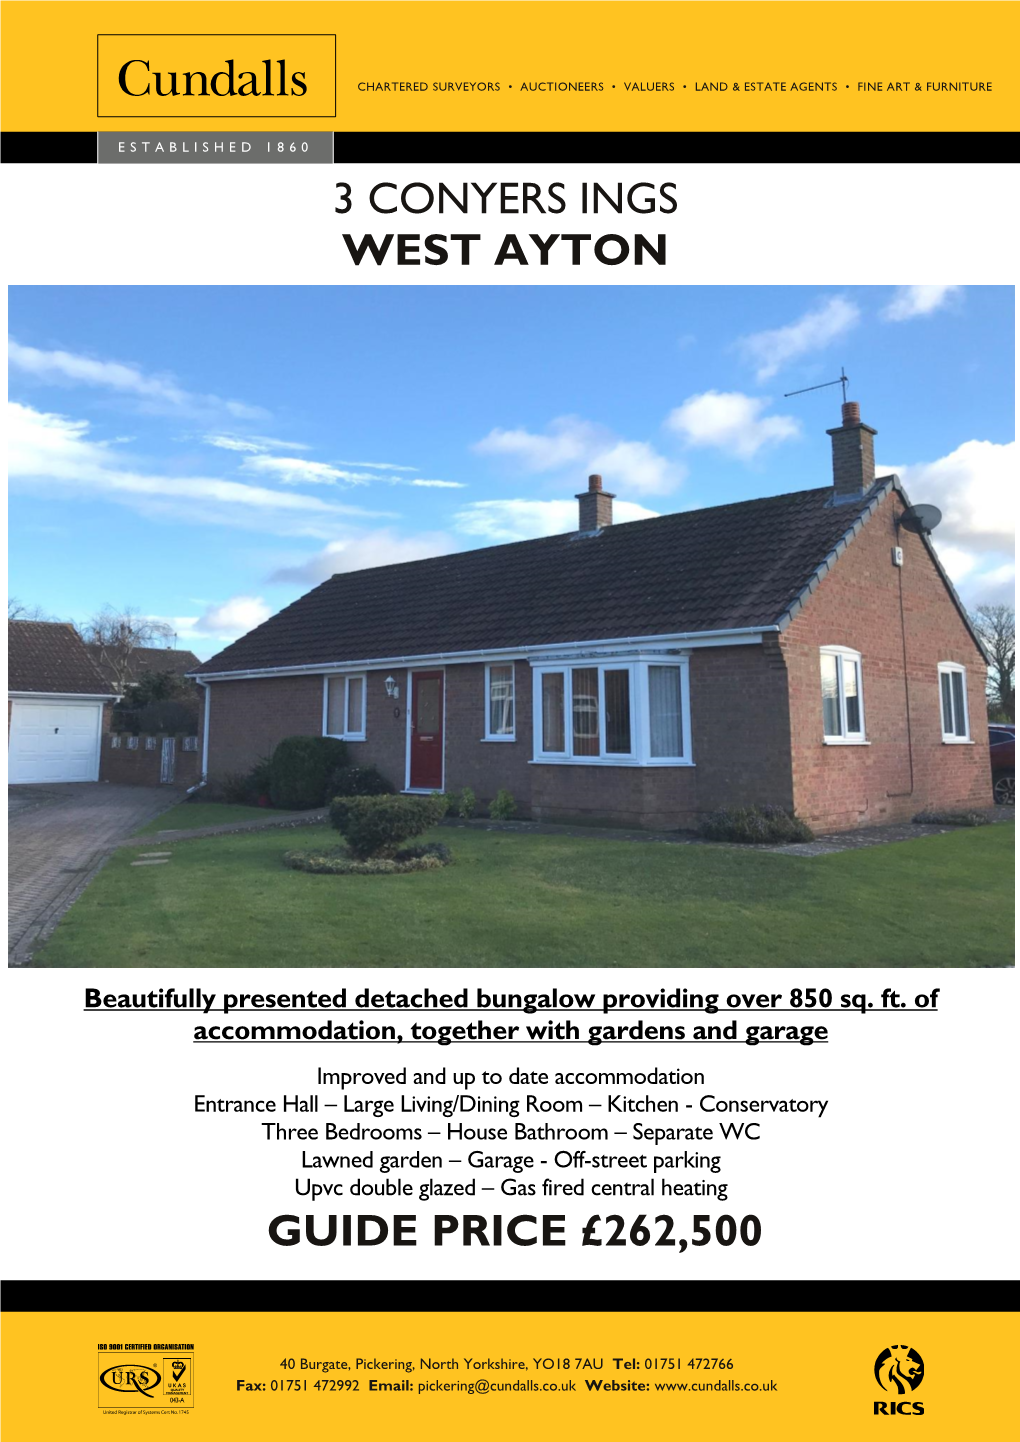 3 Conyers Ings West Ayton Guide Price £262,500